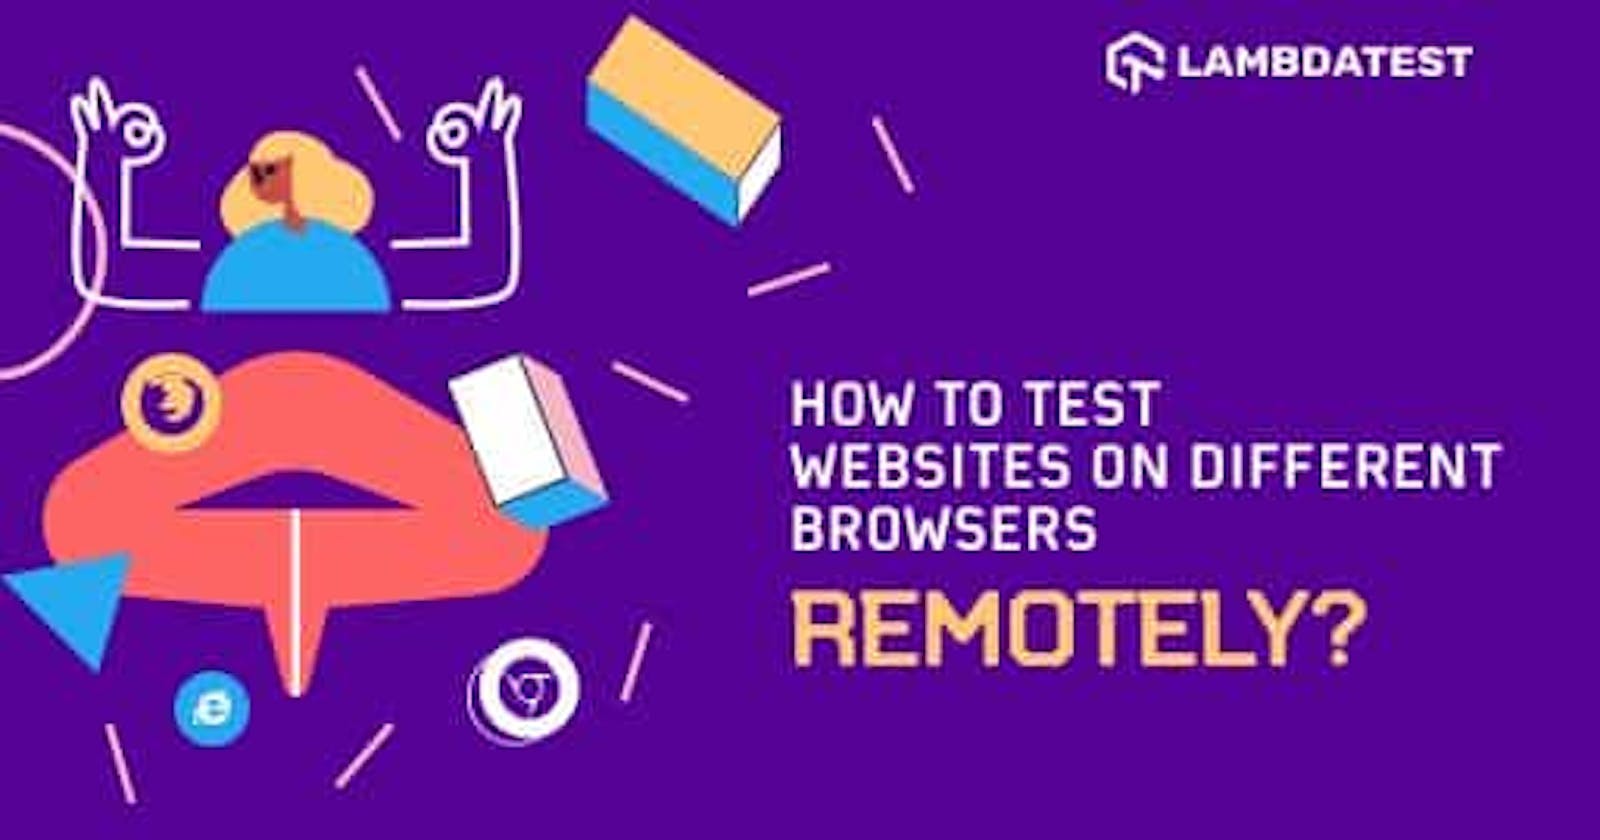 How To Test Websites On Different Browsers Remotely?